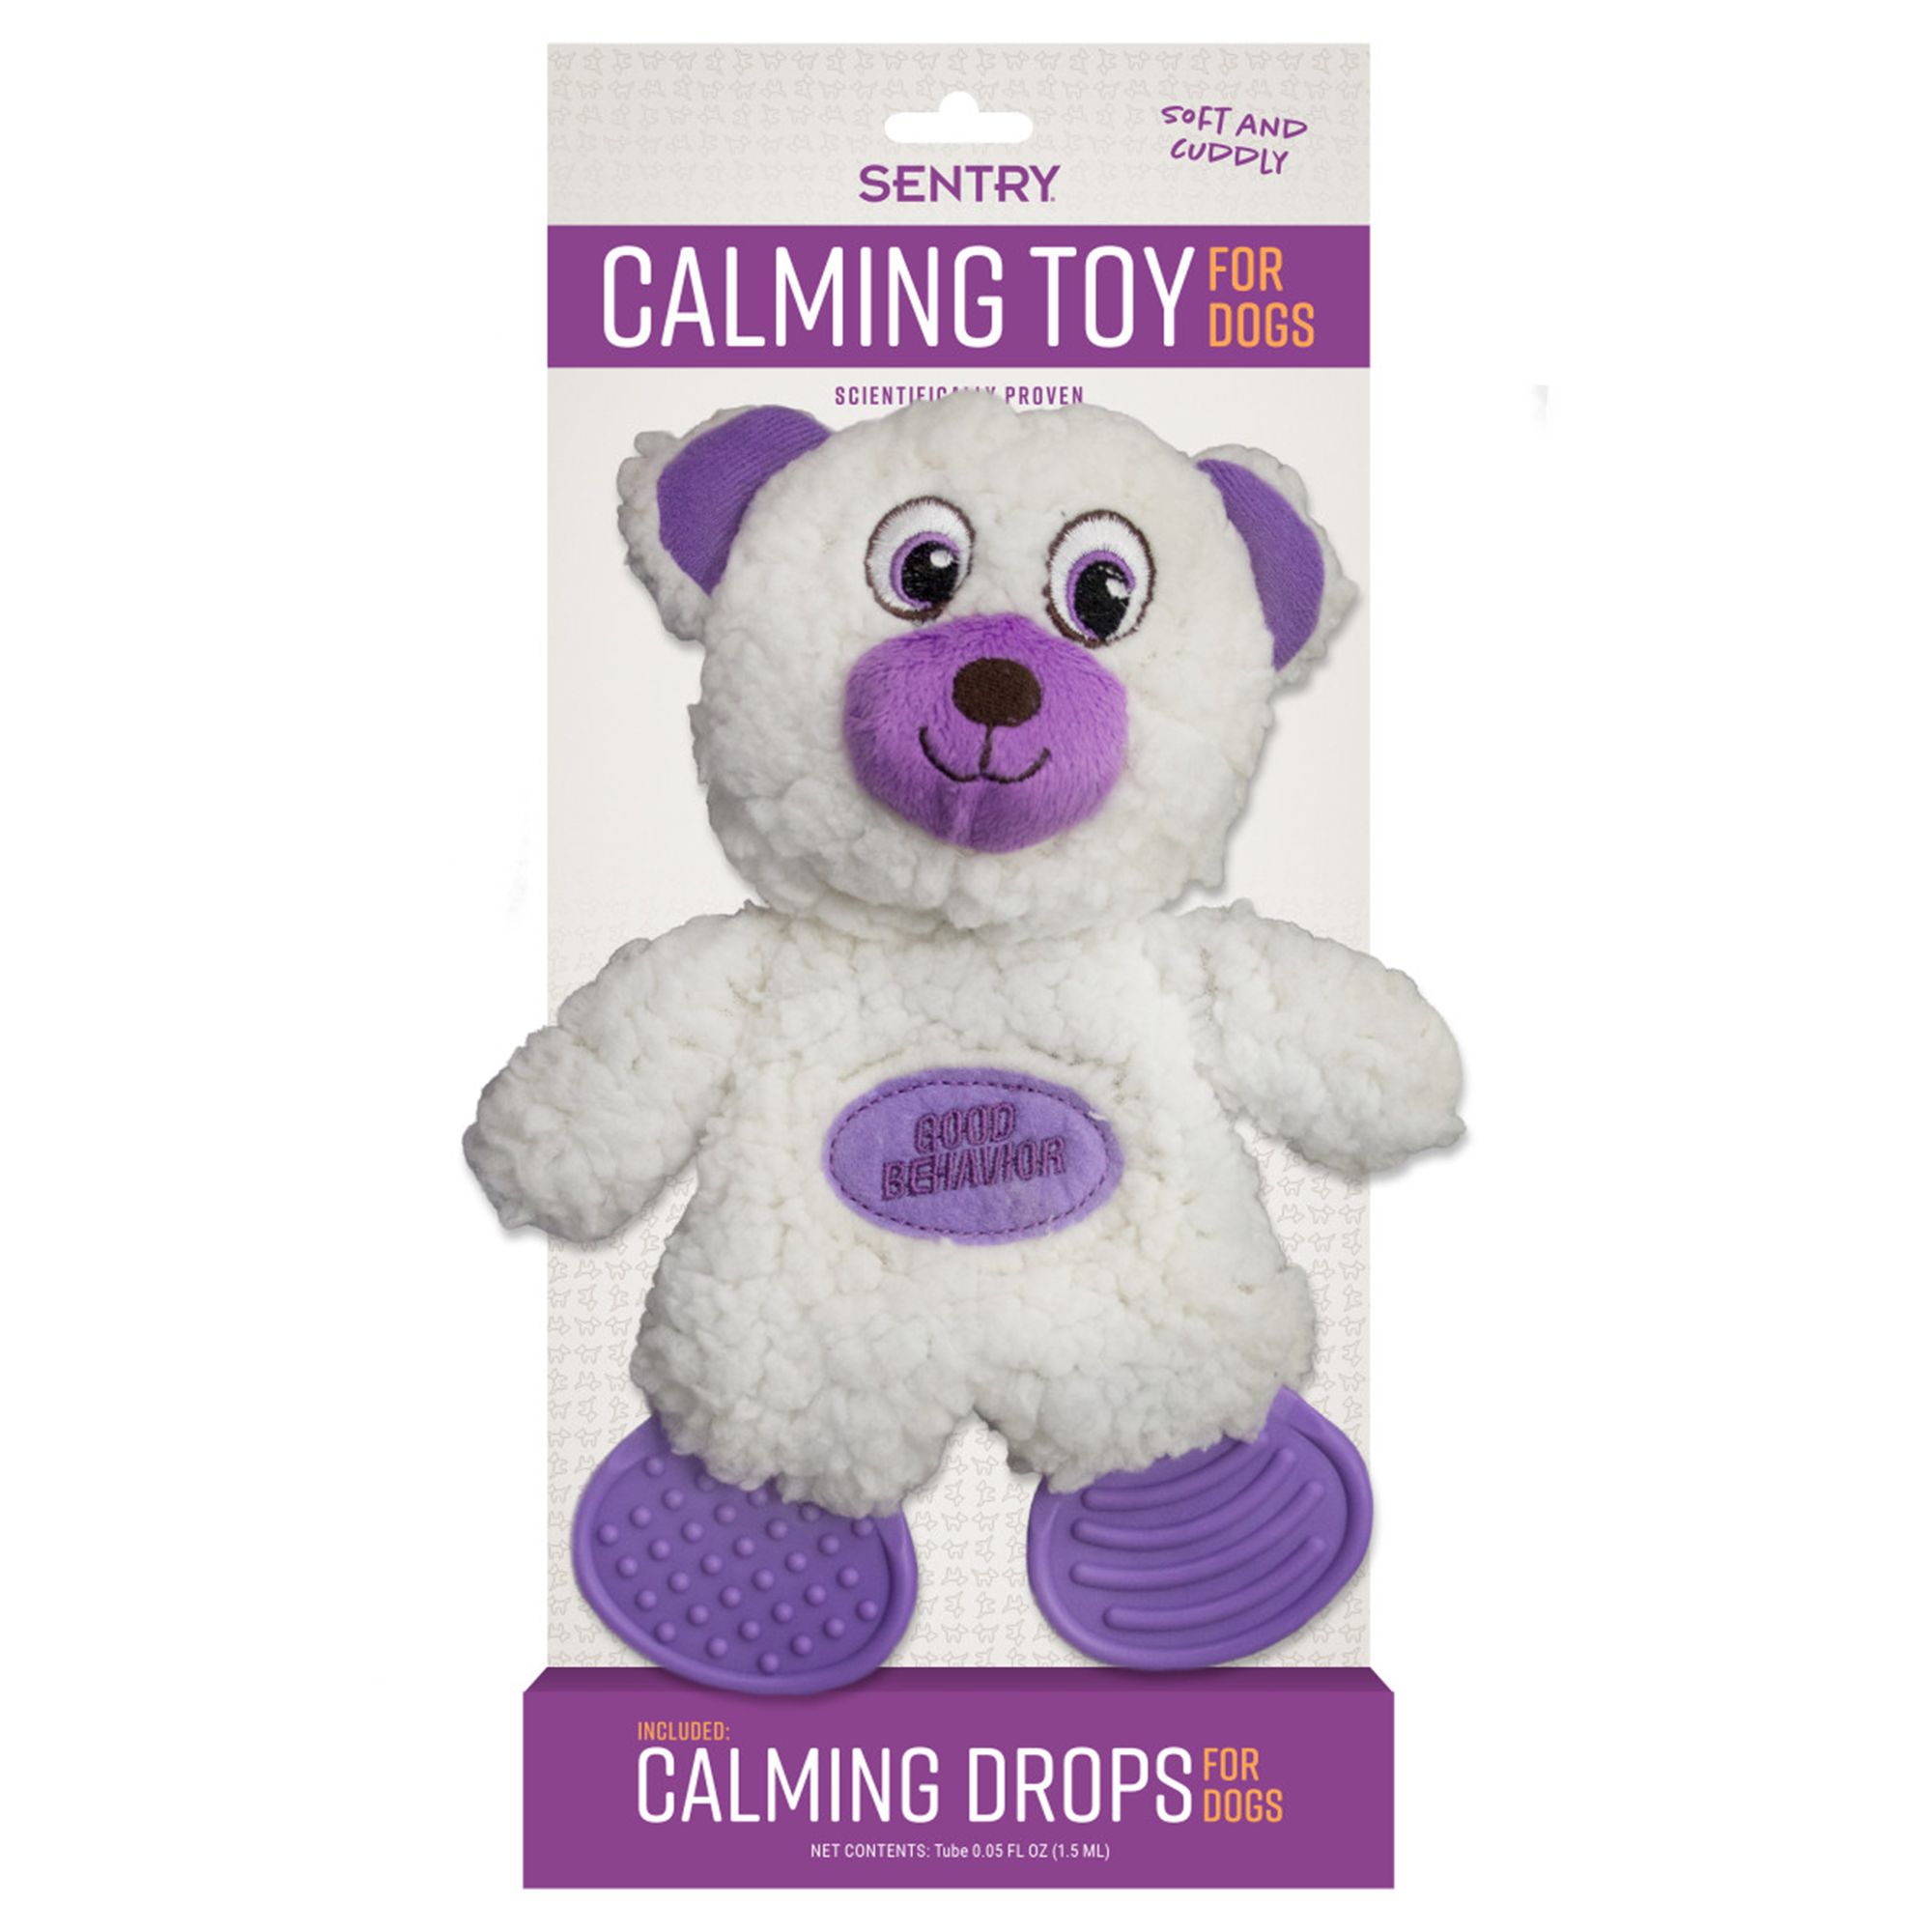 PetMedics 5 in 1 Calming Plush Pal Dog Toy with Sound, Heat and Aroma  Therapy for Dog Anxiety Relief Blue - Best Buy